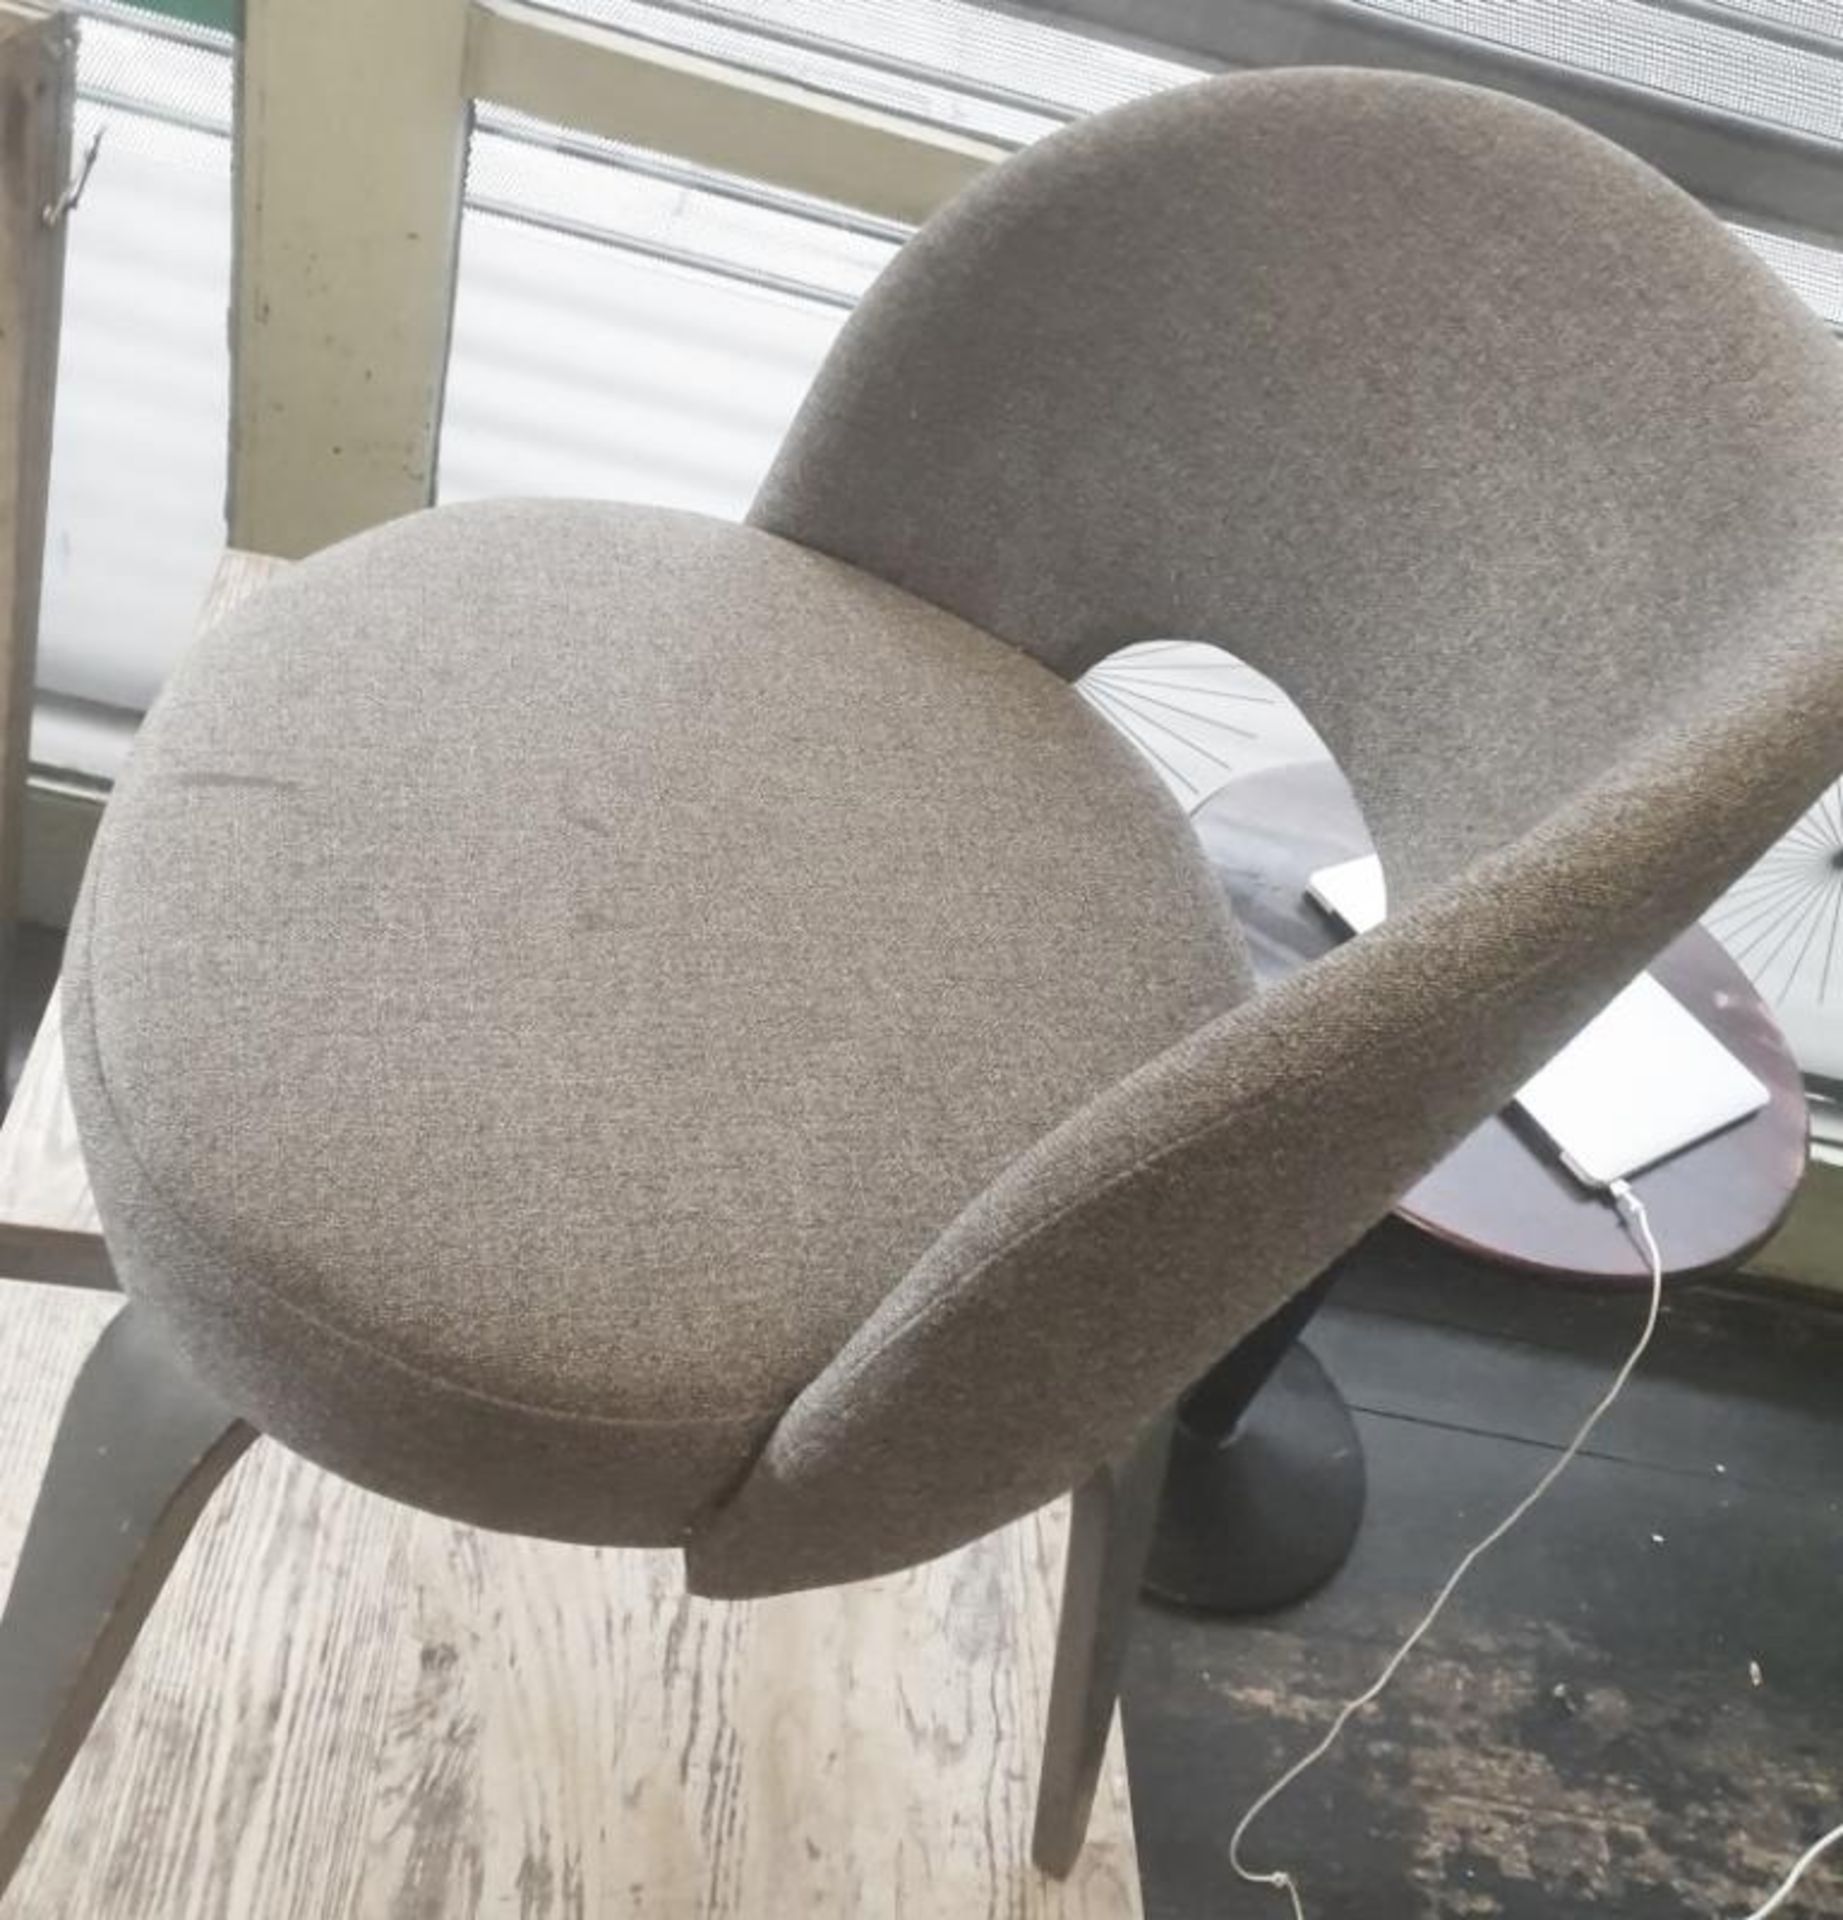 1 x Stylish Chair Upholstered In A Light Grey Fabric - Recently Taken From A Contemporary Caribbean - Image 6 of 6